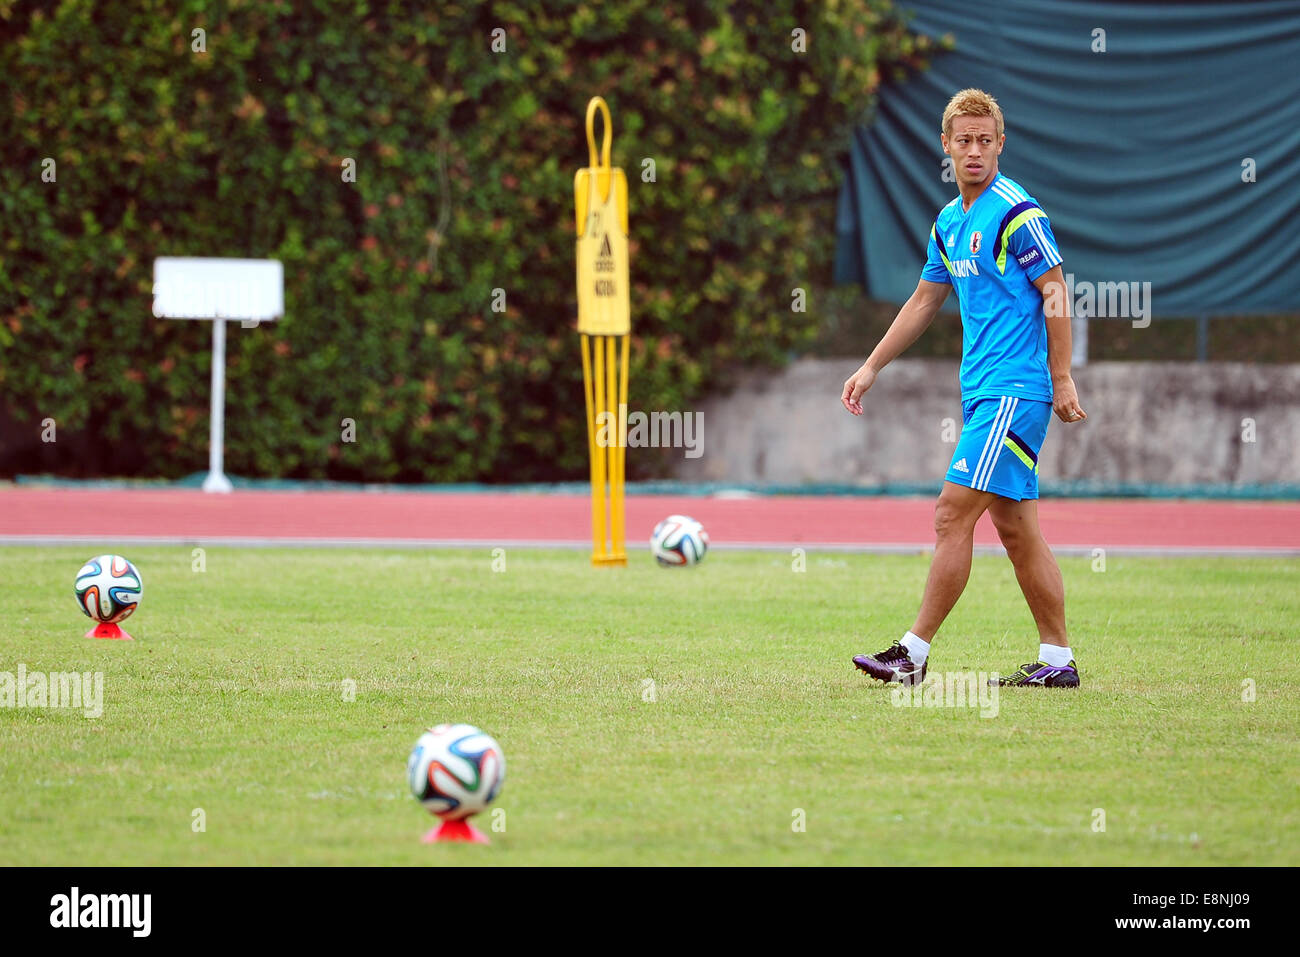 Singapore. 12th Oct, 2014. Honda Keisuke of Japan's football team attends the training session at Singapore's Bishan Stadium in Singapore, on Oct. 12, 2014. Japan and Brazil will have a friendly game at Singapore's National Stadium on Oct. 14. © Then Chih Wey/Xinhua/Alamy Live News Stock Photo